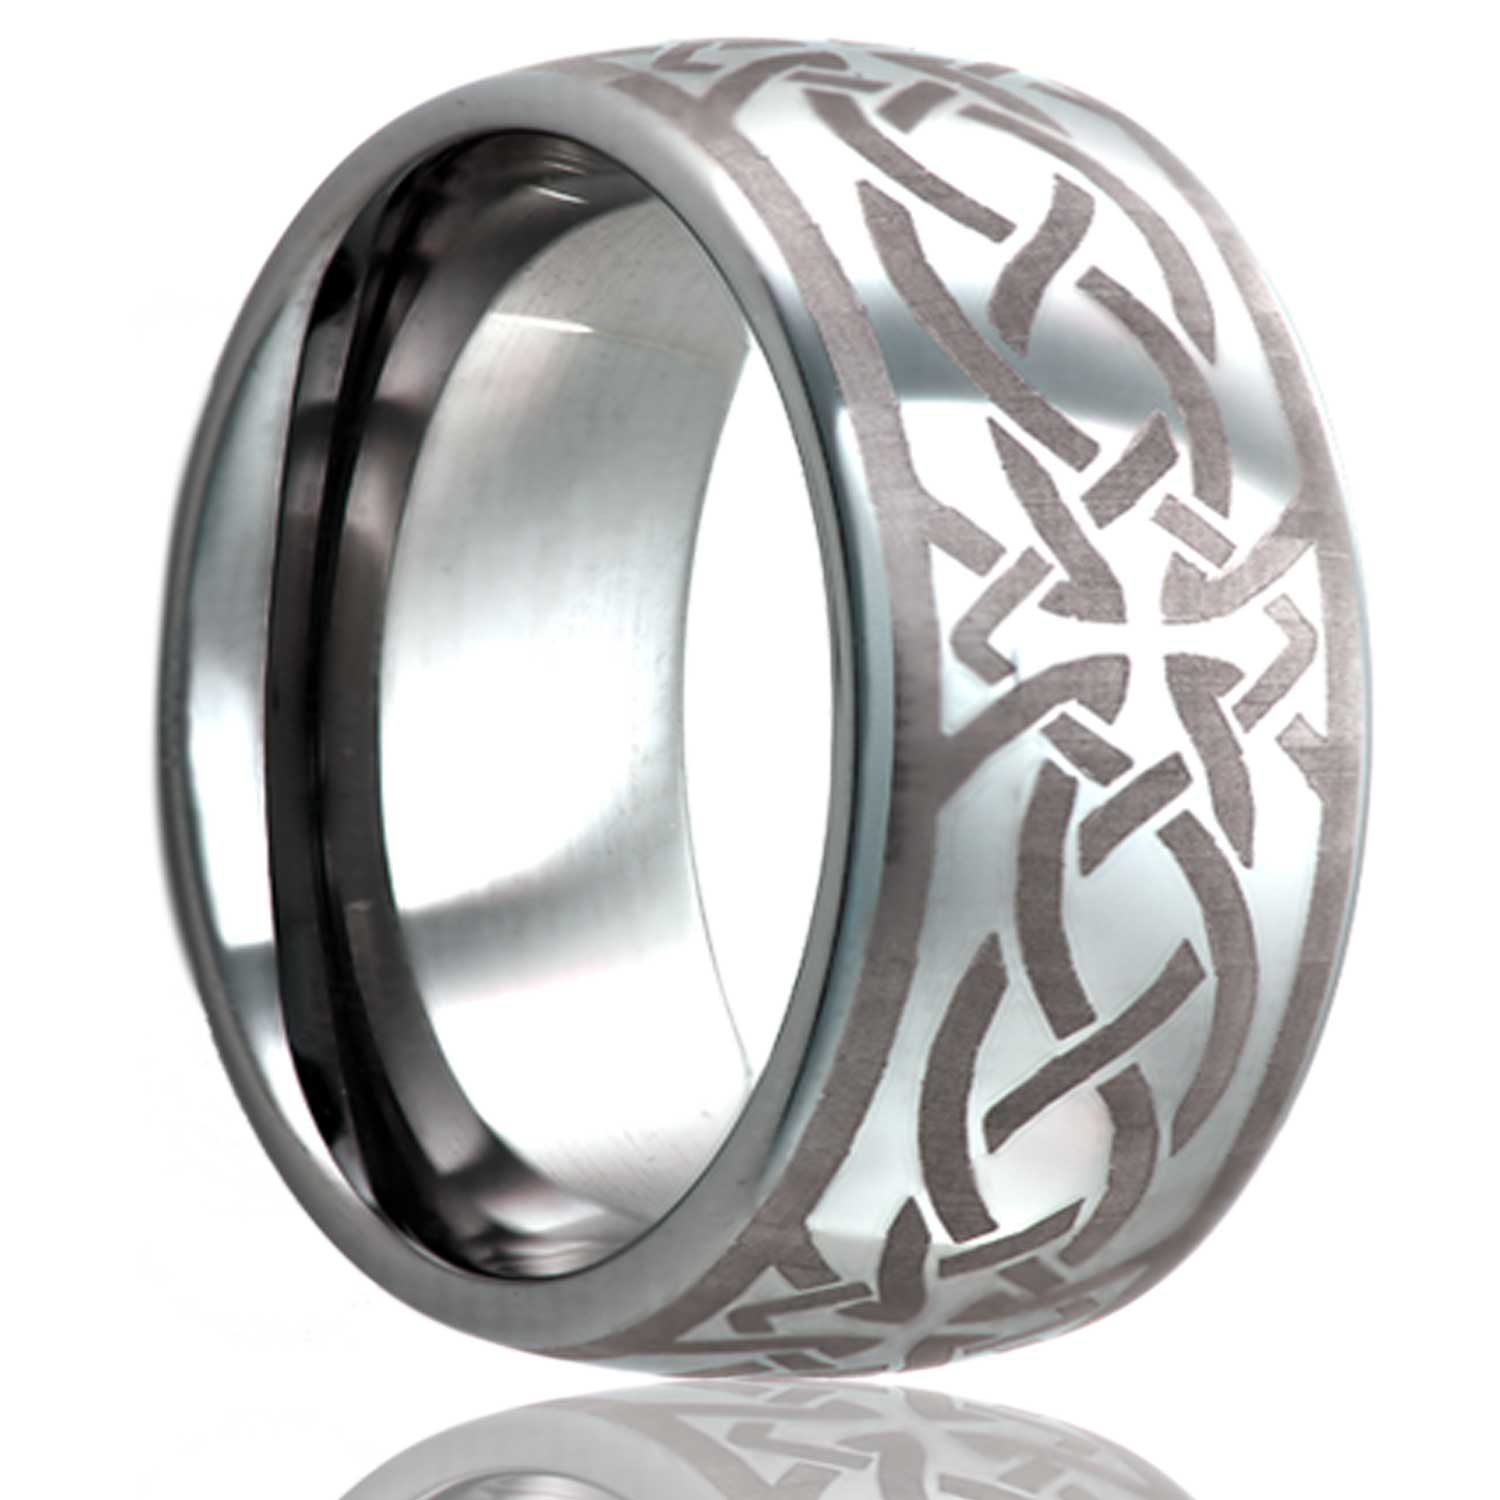 A celtic cross domed tungsten wedding band displayed on a neutral white background.